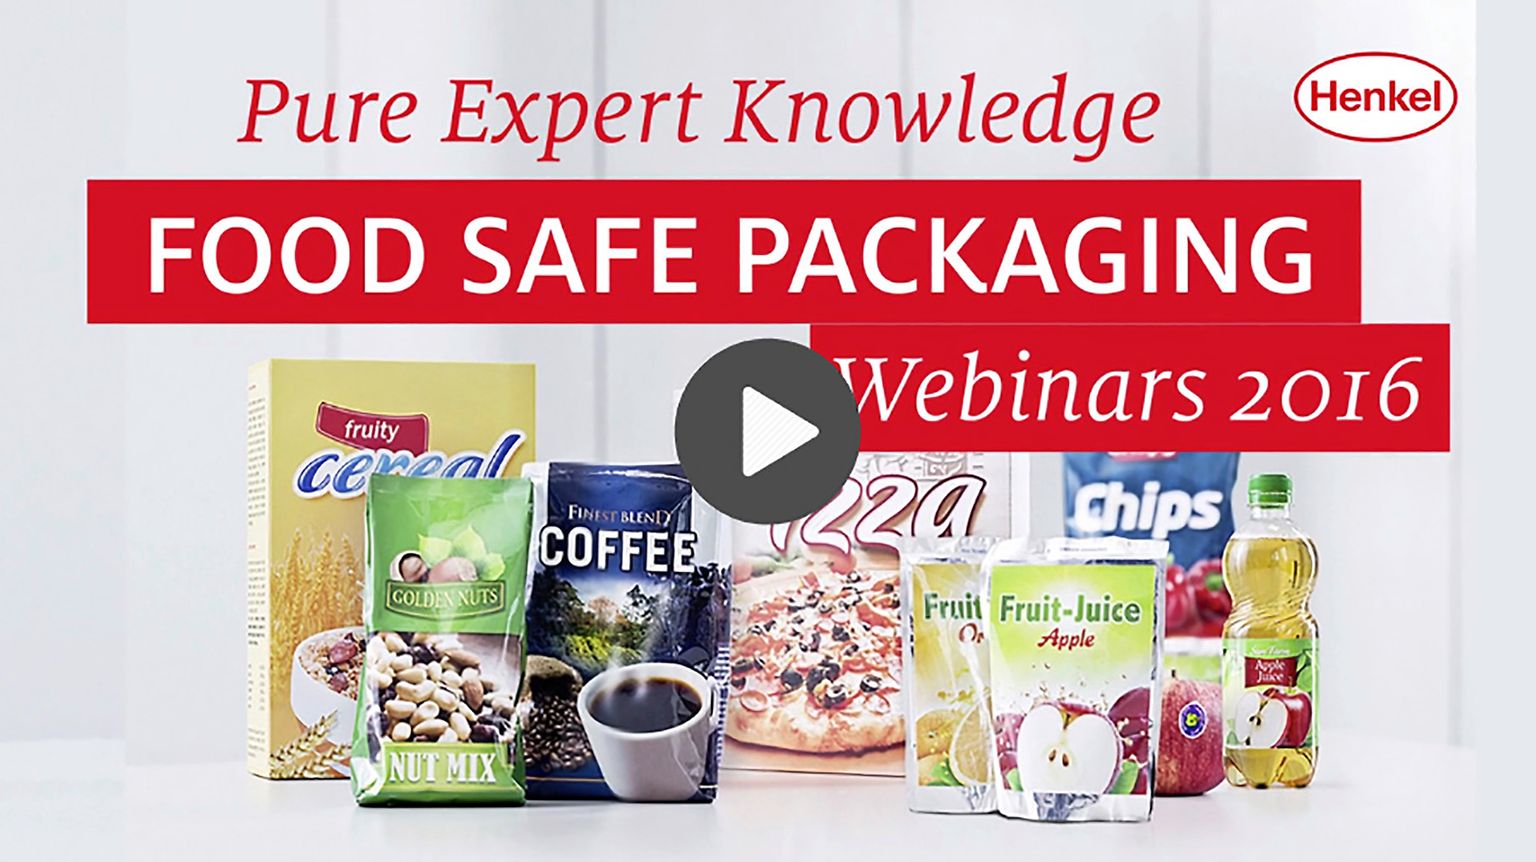 
The introductory video for Henkel’s Food Safety Webinar “Ways to Improve Food Safety” can be found here: http://www.henkel-adhesives.com/ways-to-improve
The video file can be provided on request: henkel.adhesive-technologies@emanatepr.com